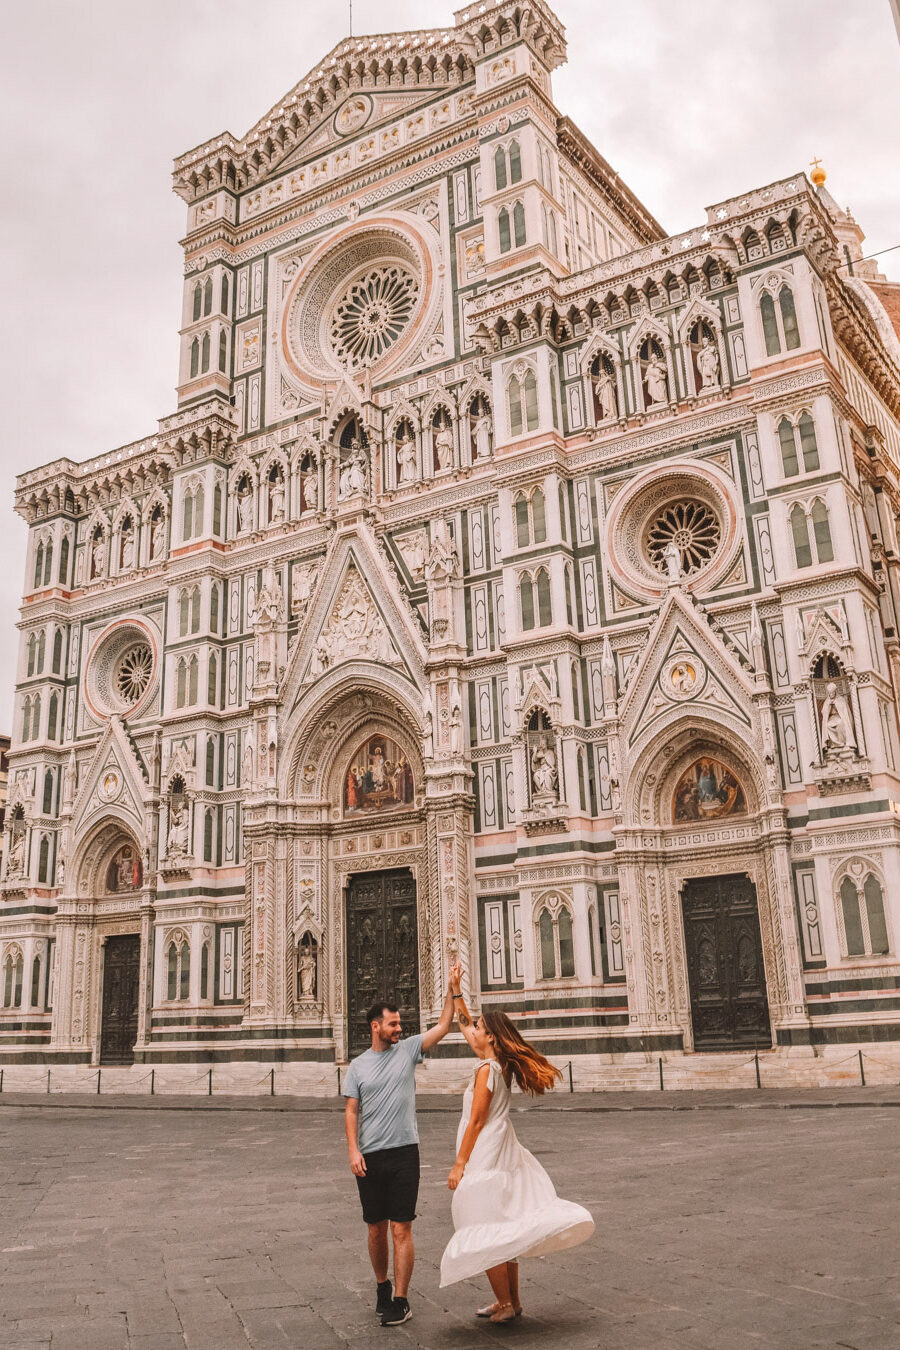 Chris and Reanna dancing Infront of The Duomo during our 1 day Florence